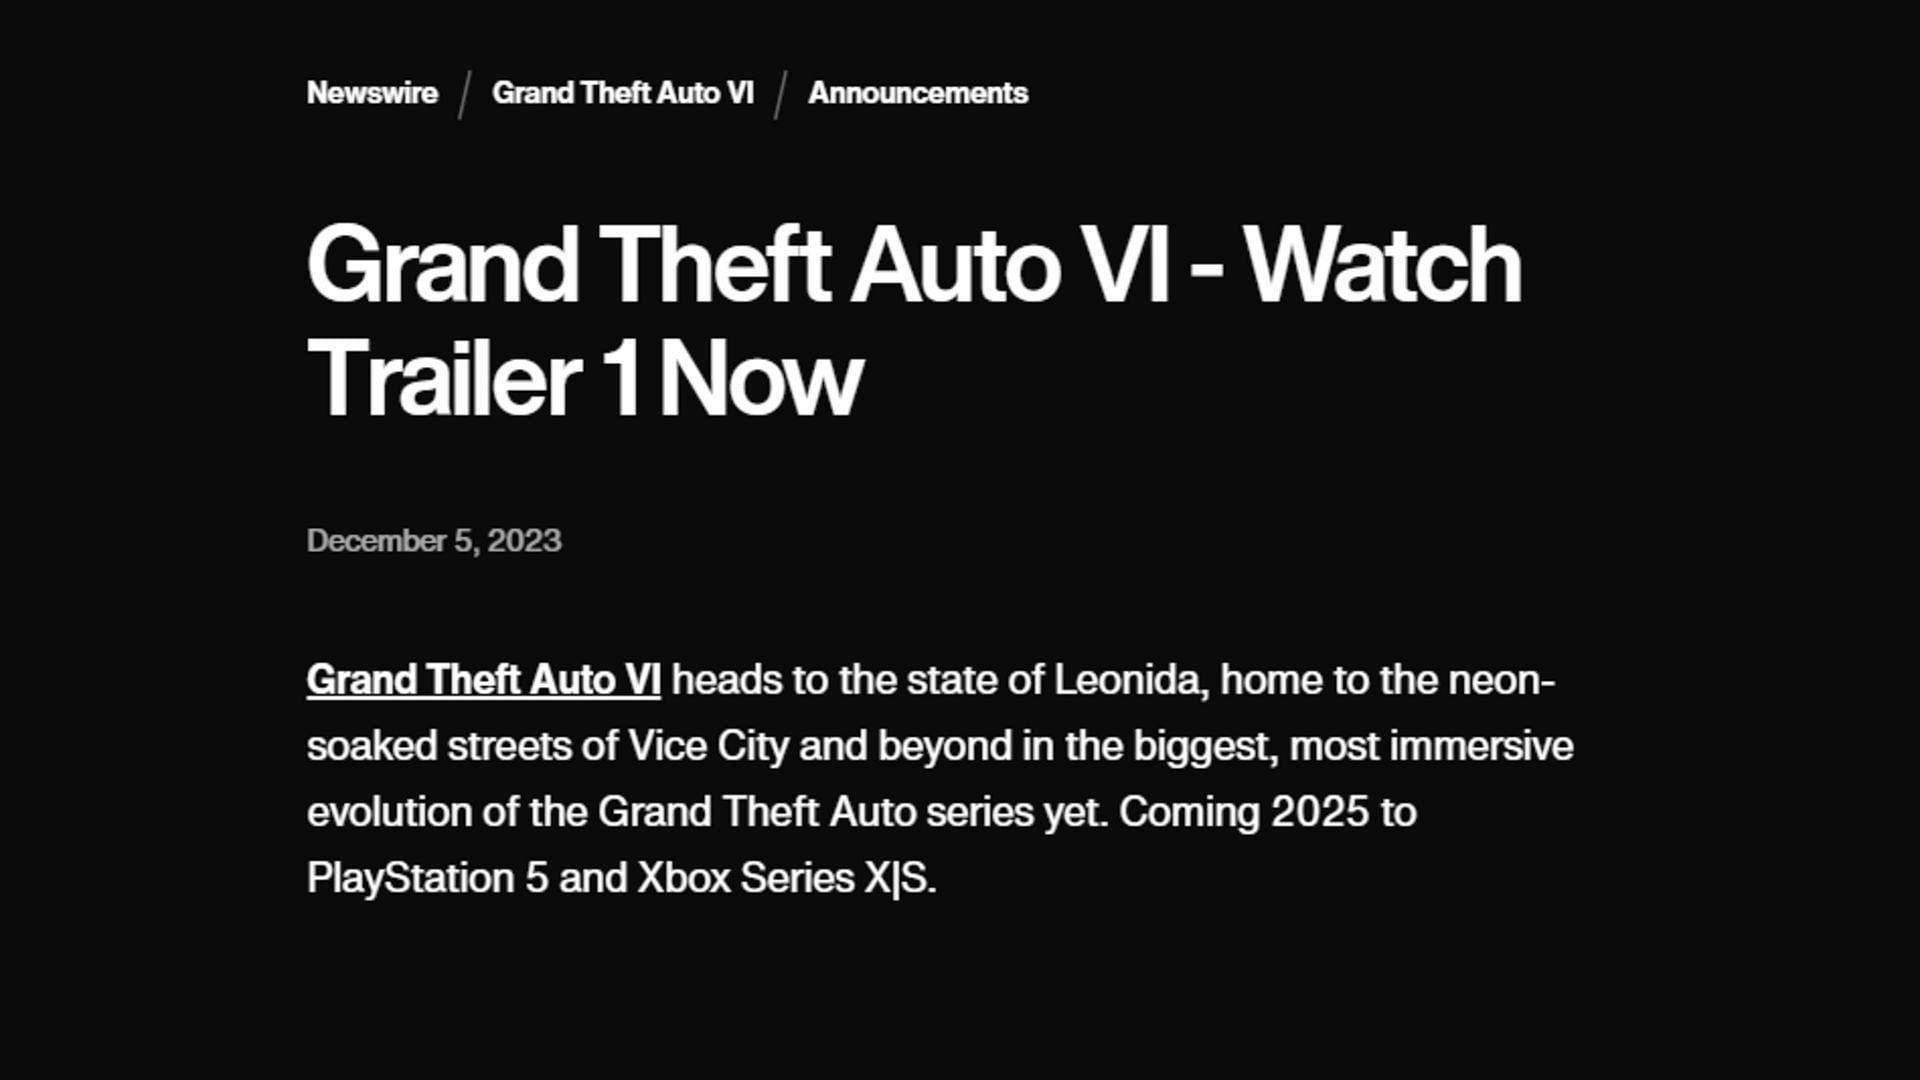 A screenshot revealing information about GTA VI set in Leonida with Vice City (Image via Rockstar Games)